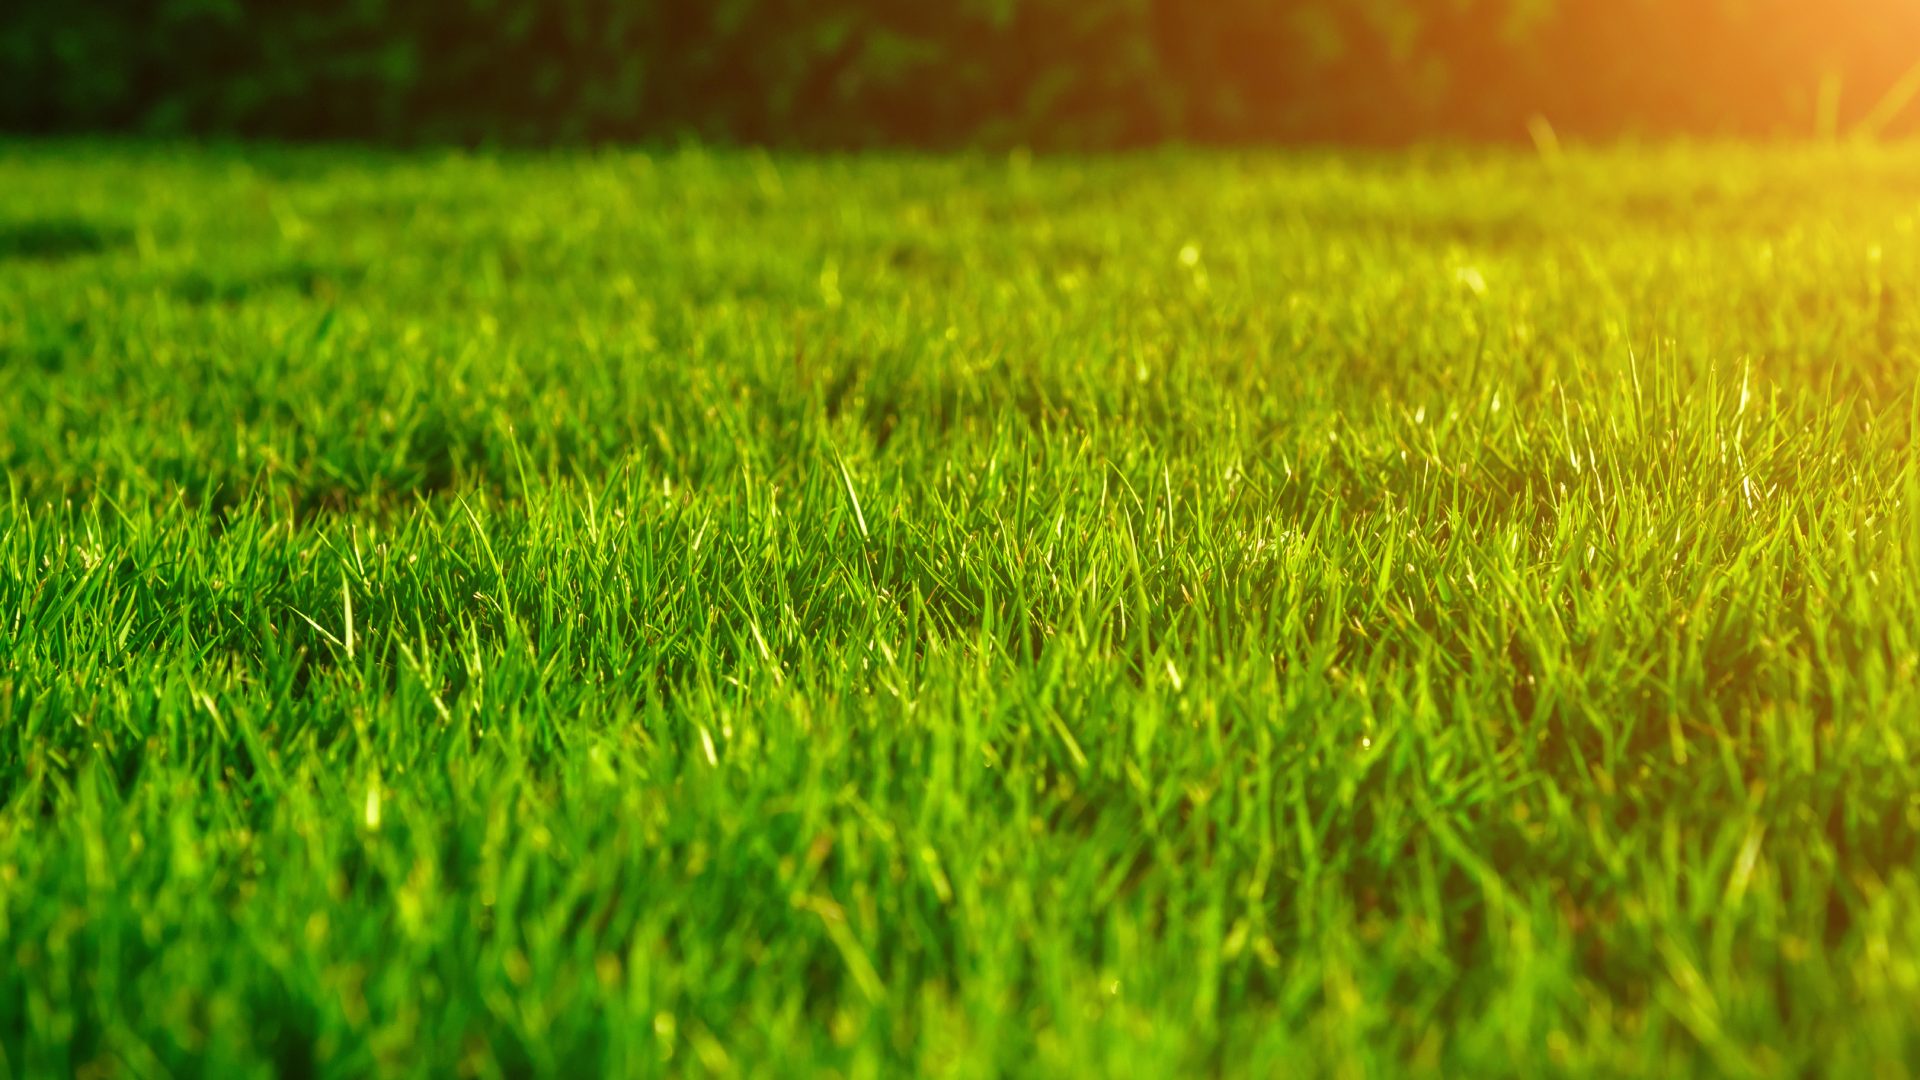 Lawn with a sun glare overlay in Seymour, WI.